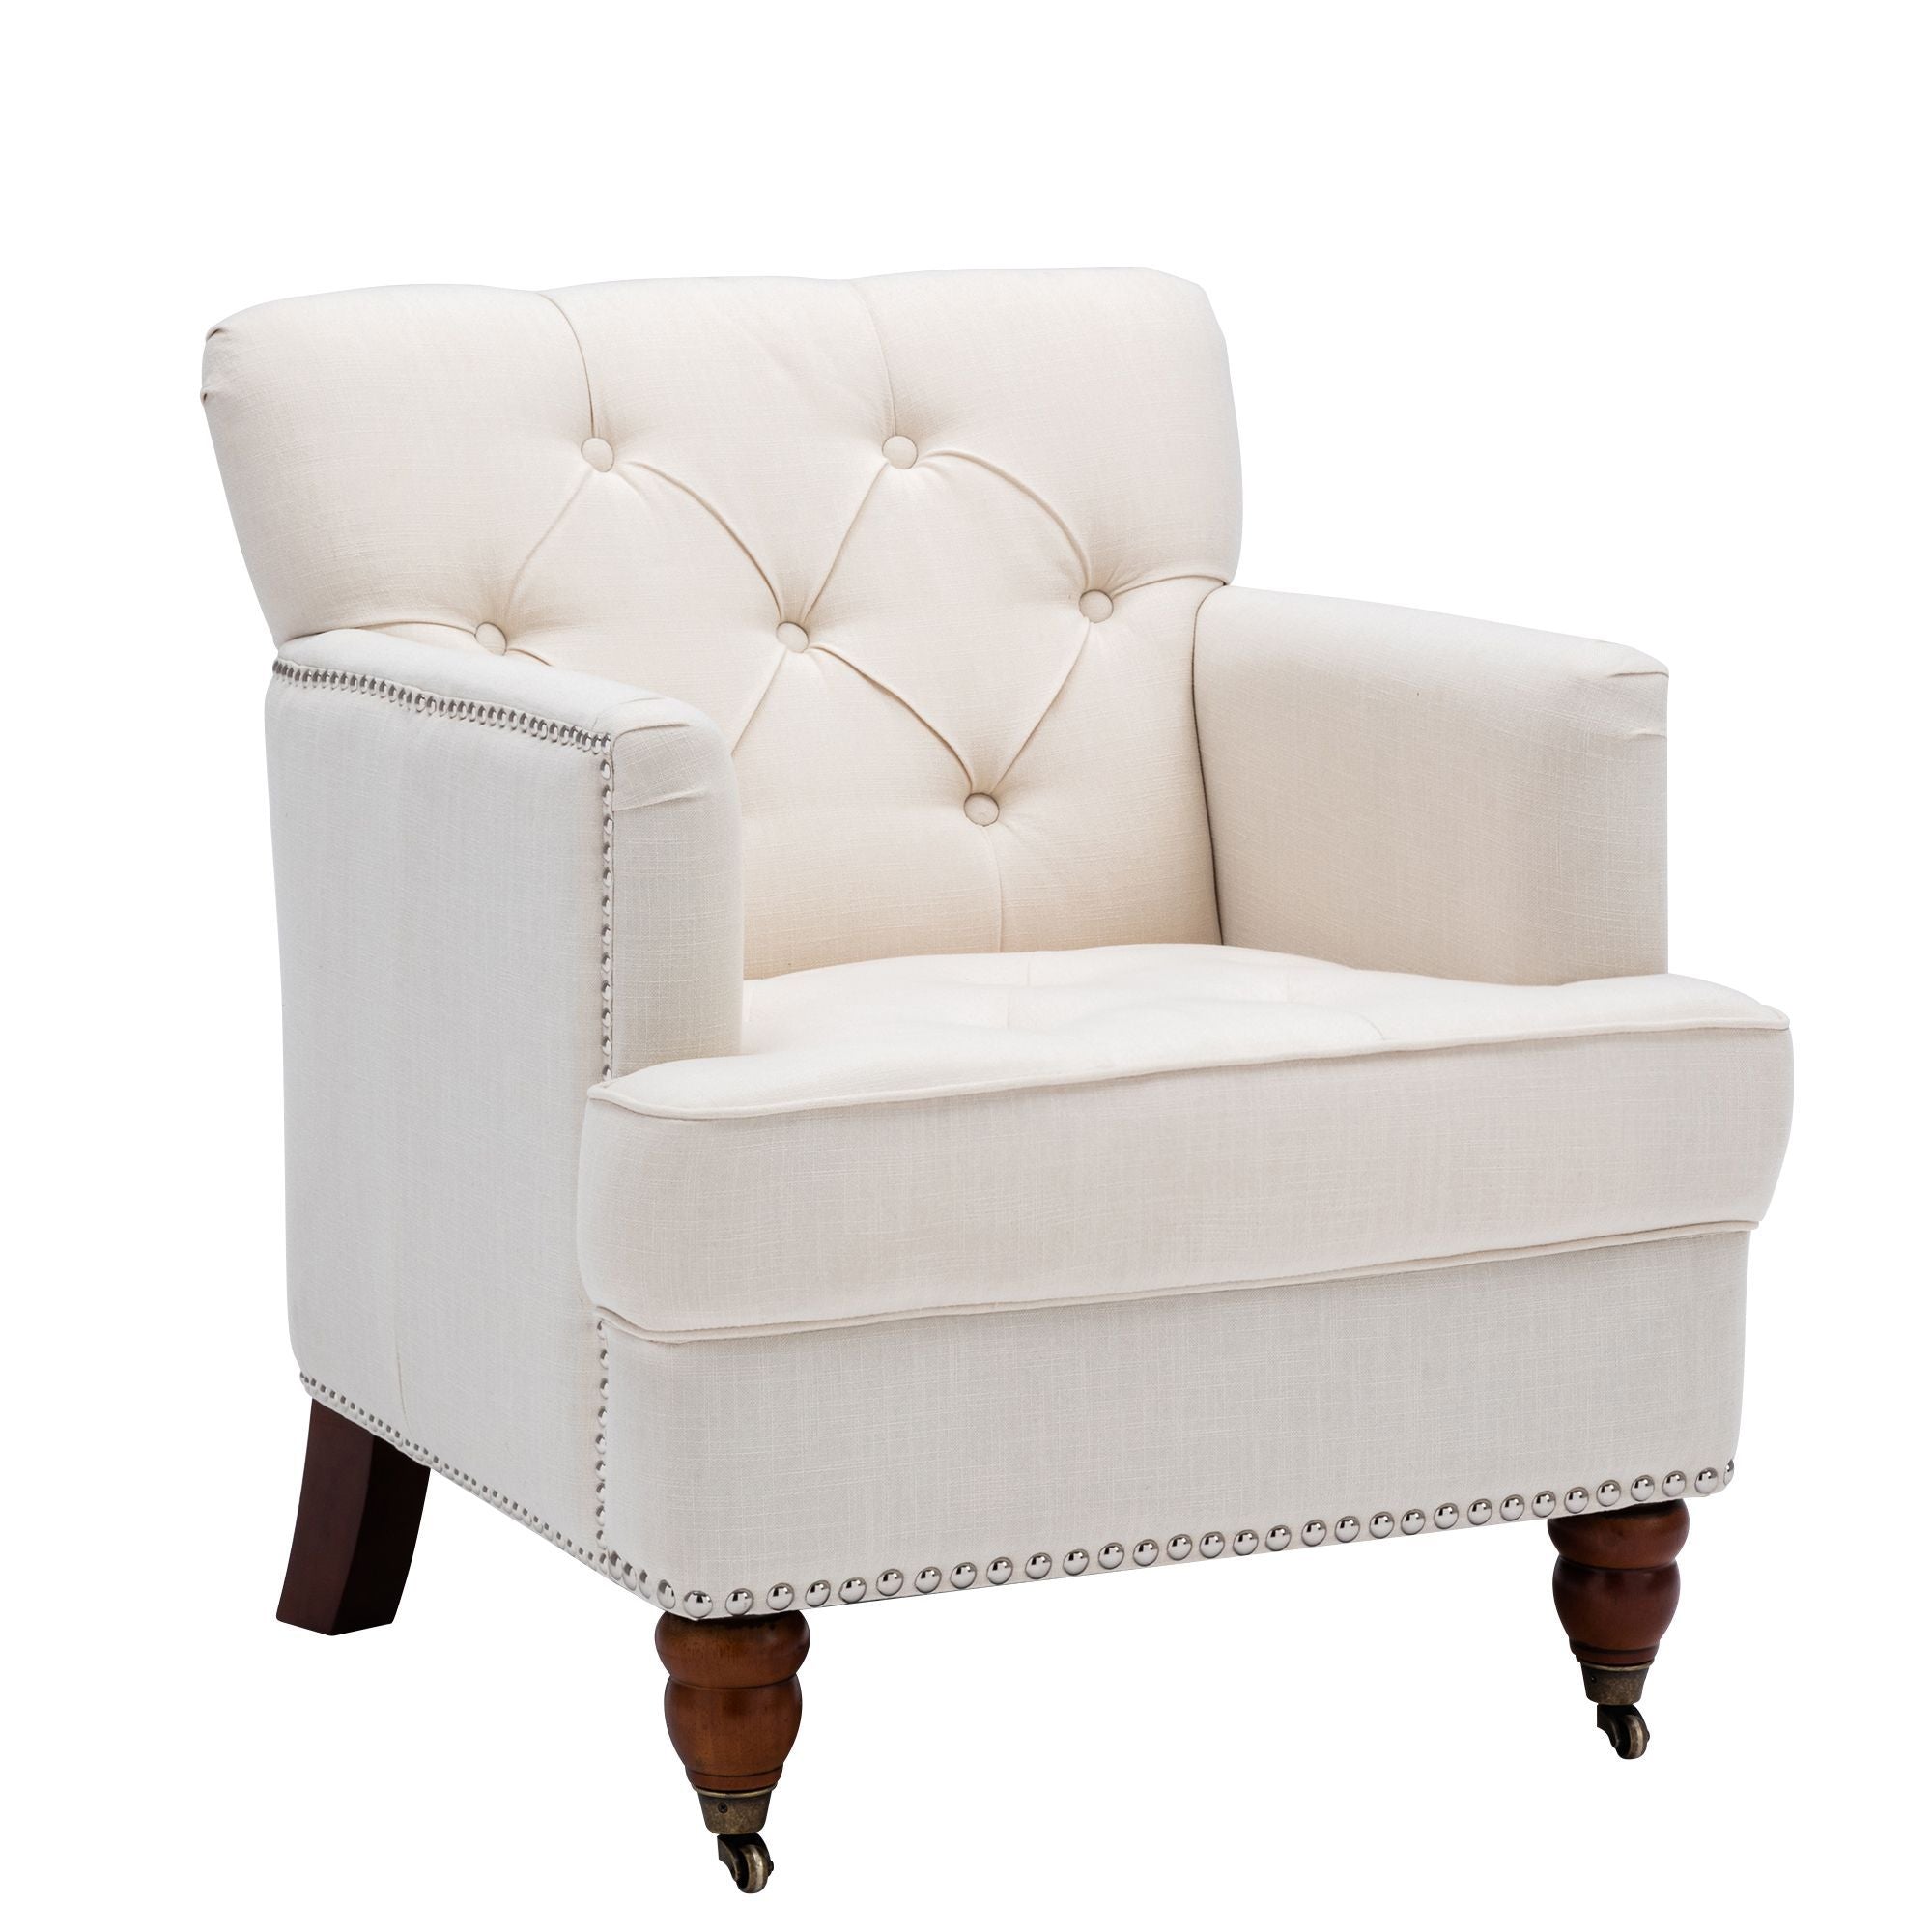 Modern Style Tub Chair for for Living Room,Linen club chair,Beige